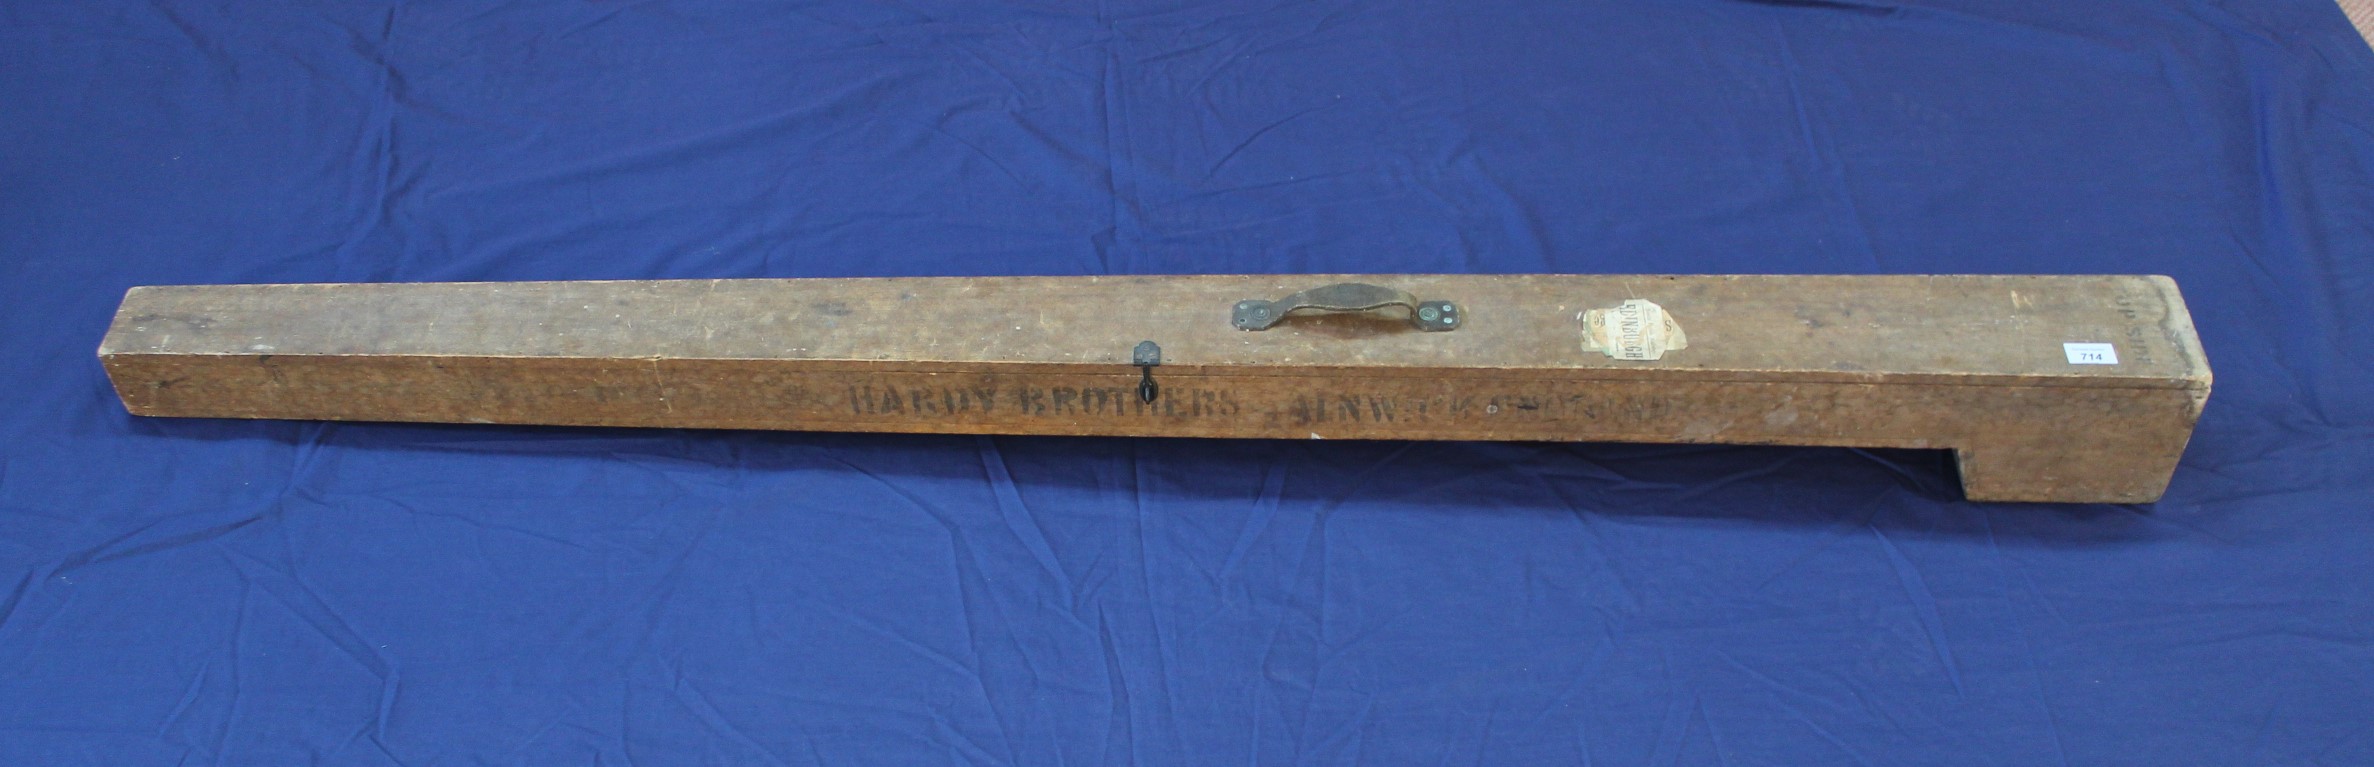 A Hardy wooden carry case 5' 5 1/2" long, stamped Hardy Brothers, Alnwick,